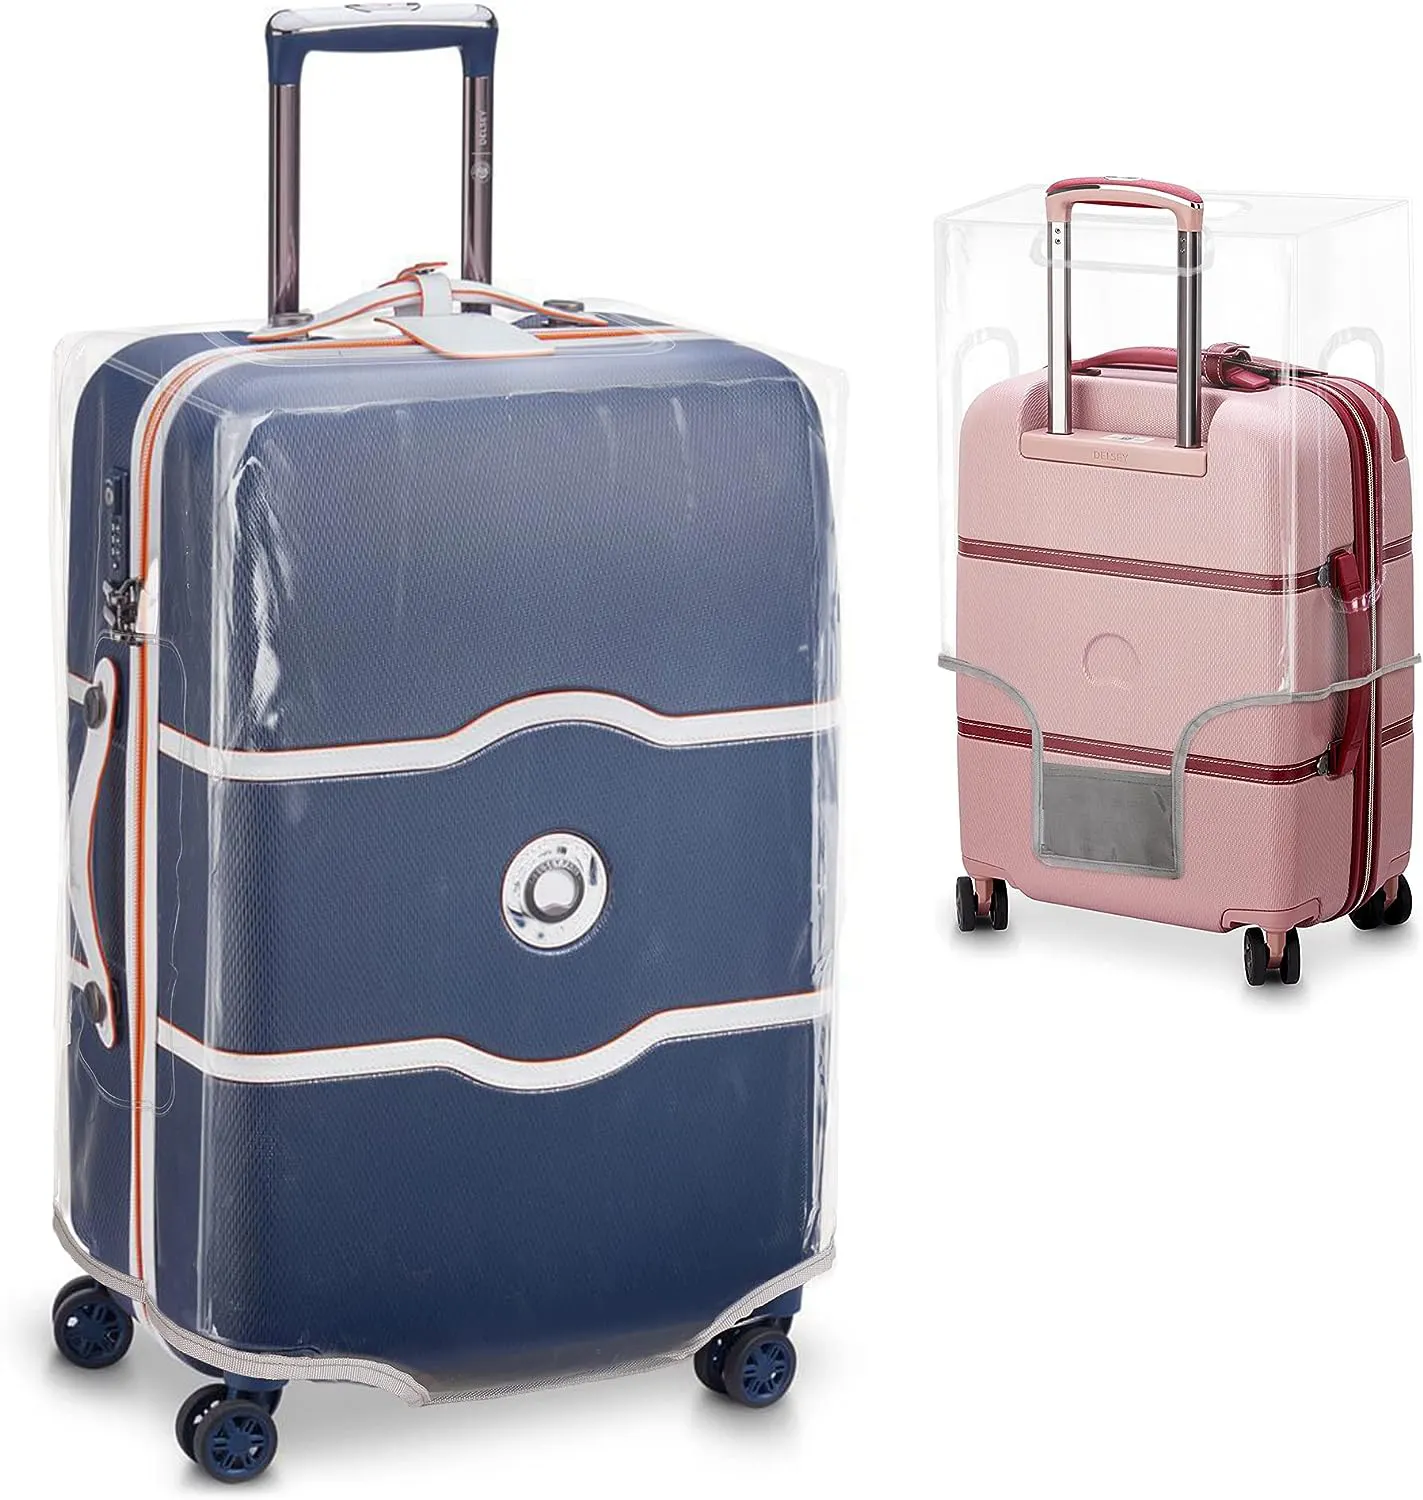 ISO9001 BSCI factory custom produce clear PVC luggage protector travel suitcase cover